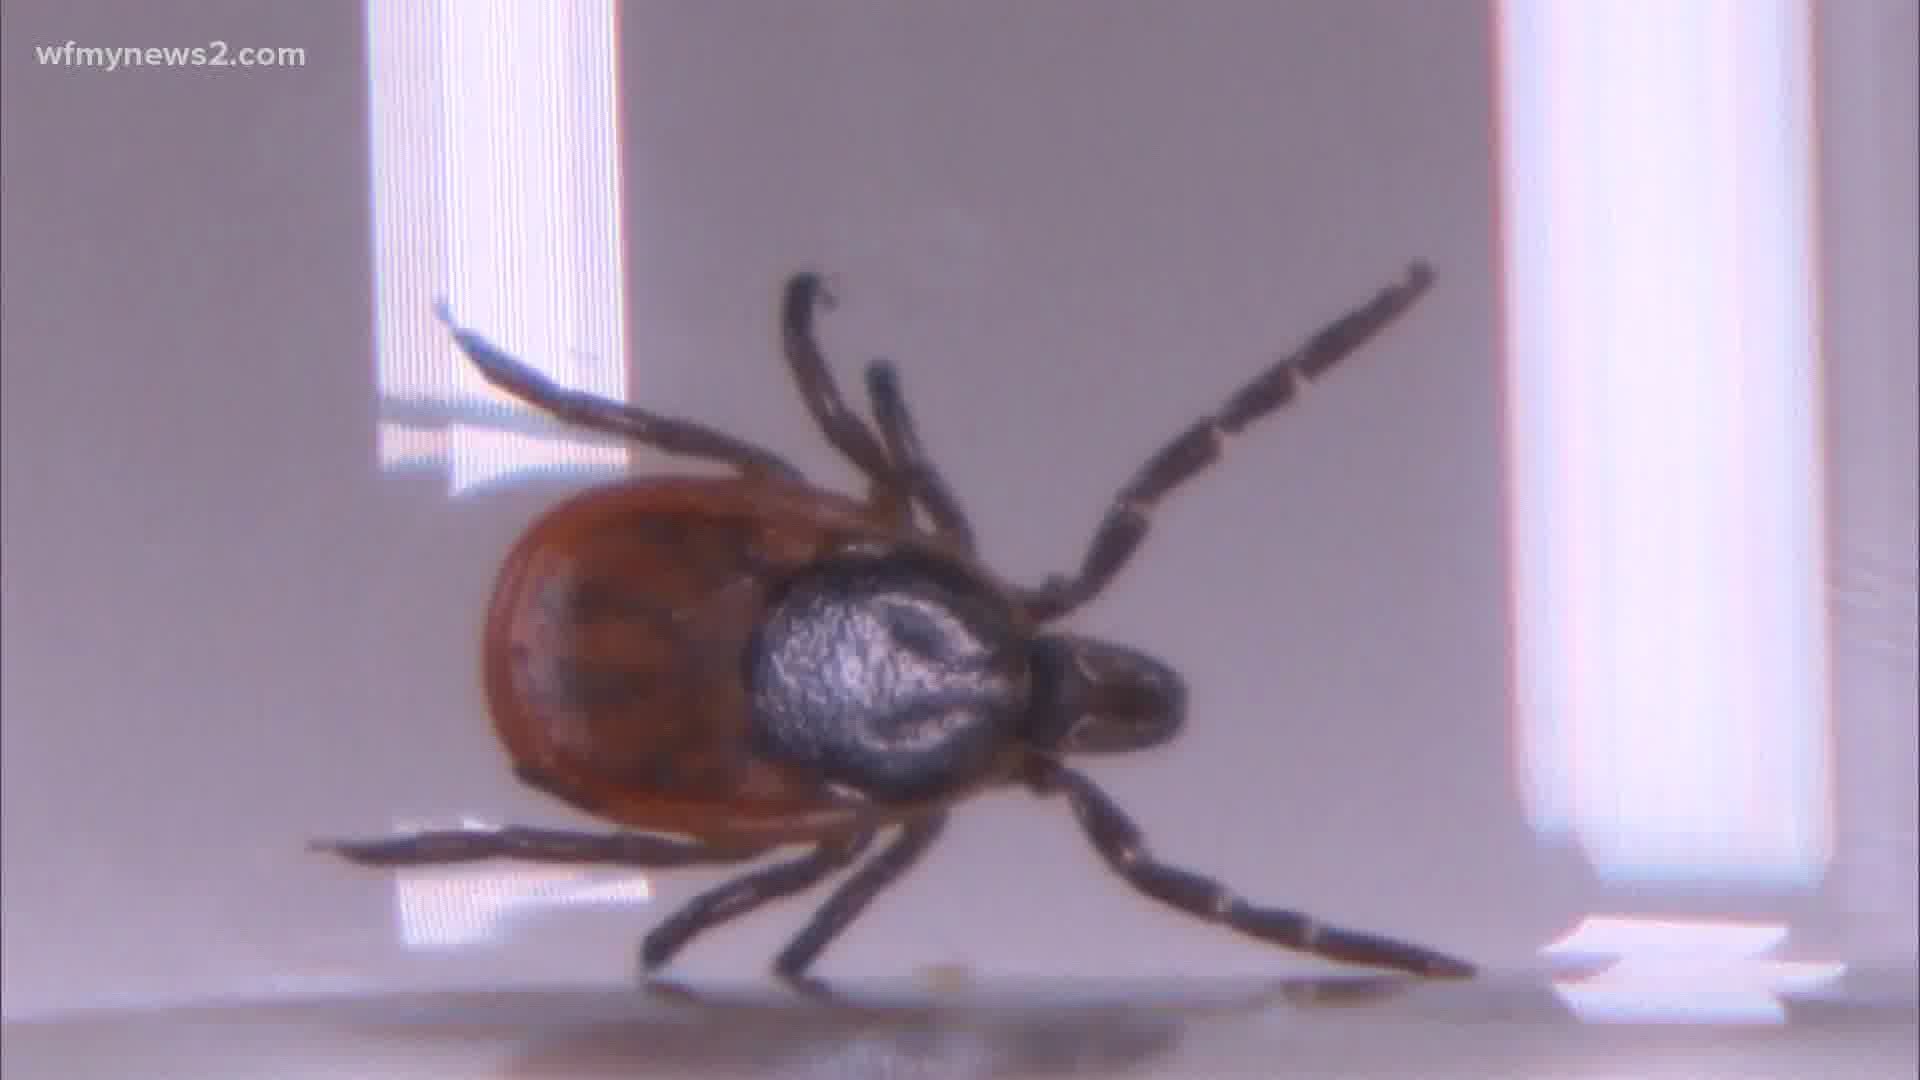 Health experts are warning people about the symptoms of Lyme Disease. The disease has symptoms similar to coronavirus and infects more people in the summer.